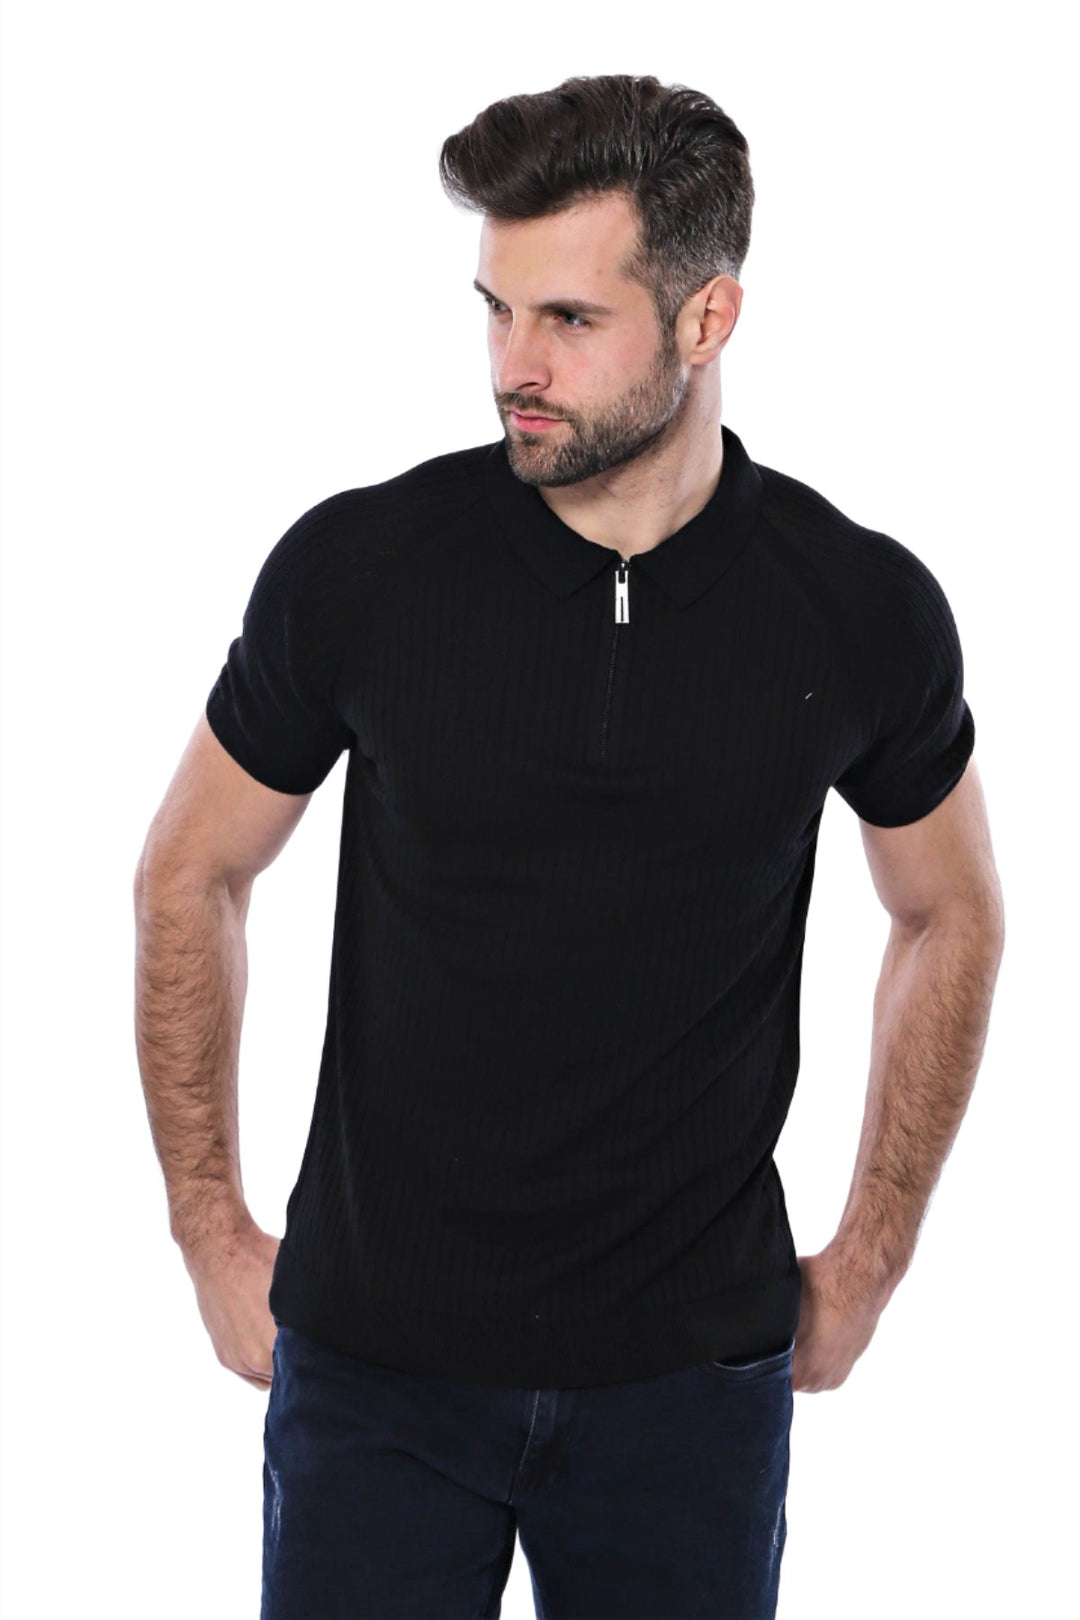 Polo Zippered Patterned Black Knitted T-Shirt - Wessi